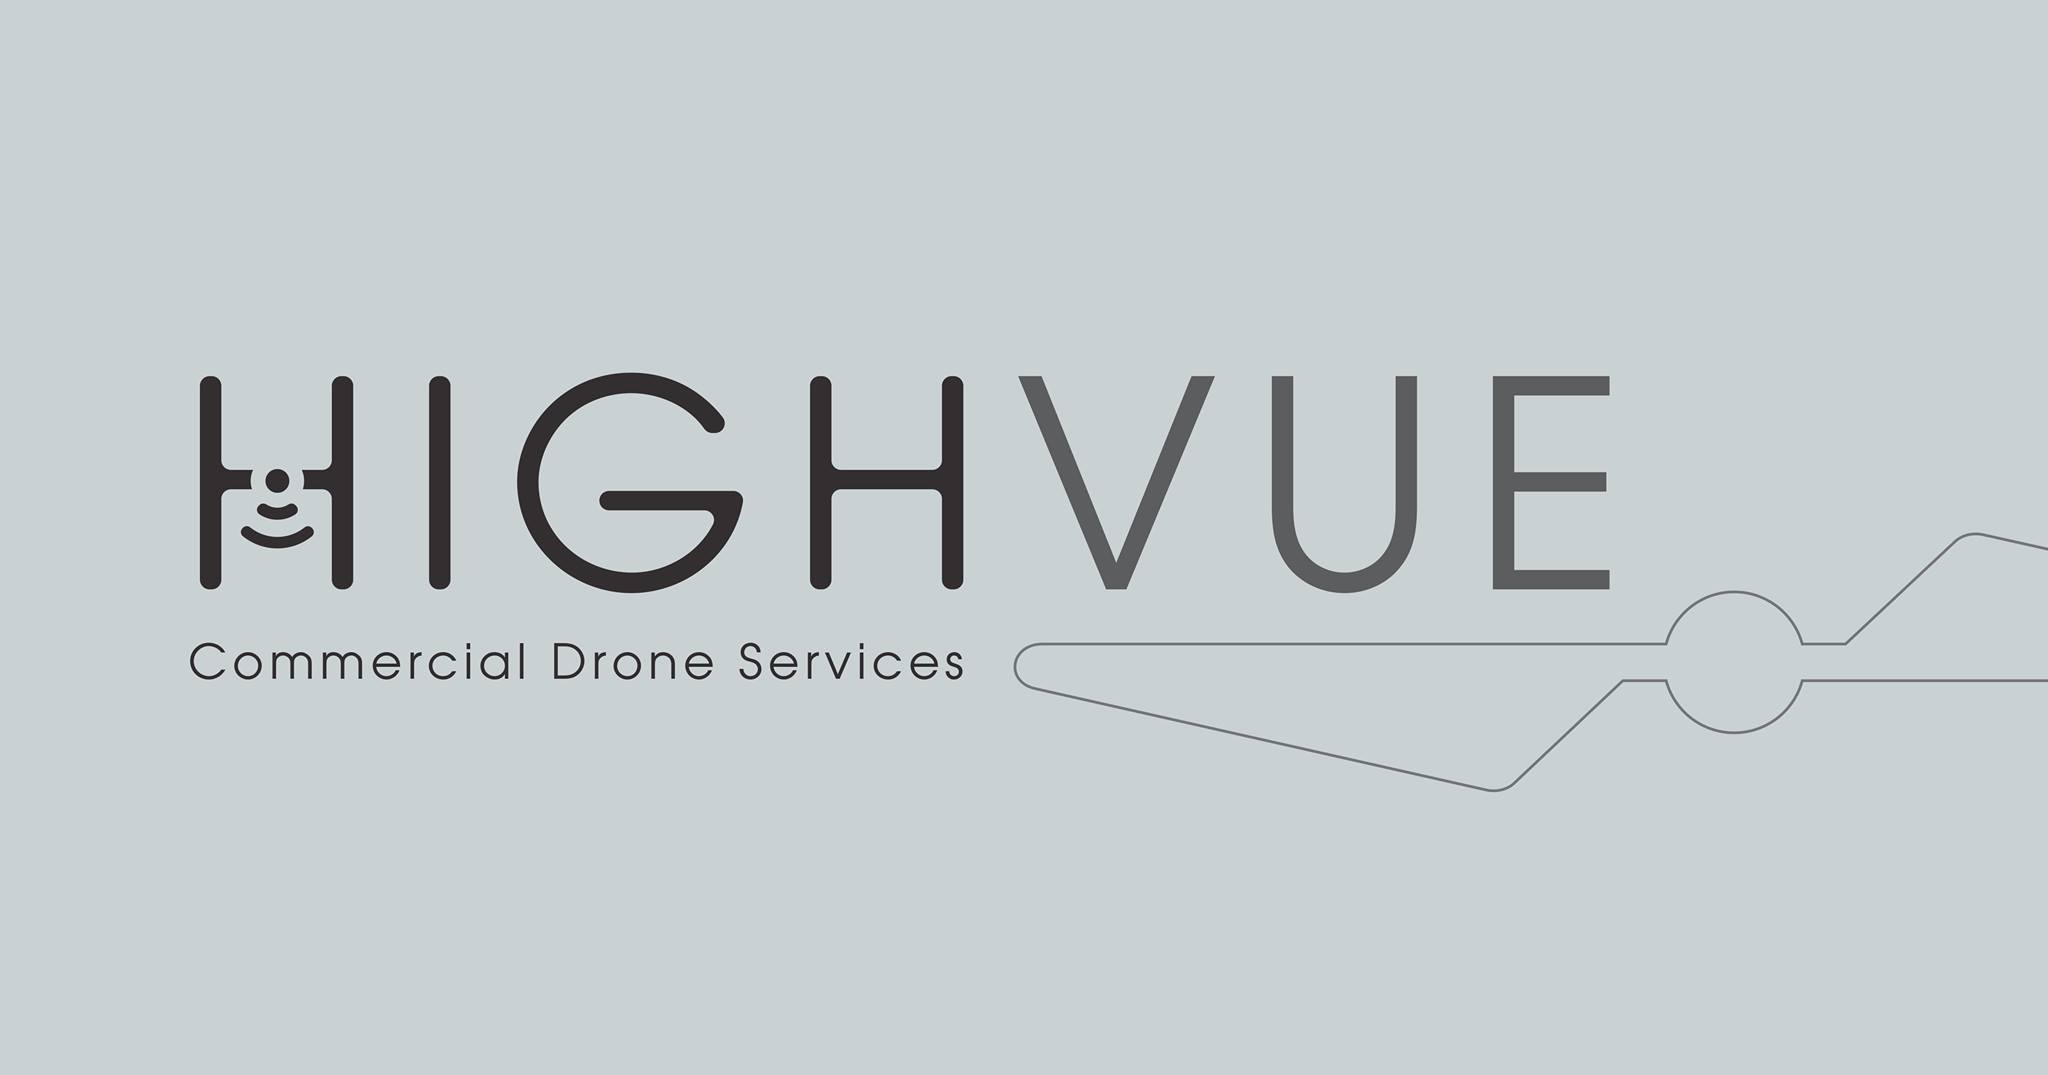 Highvue Commercial Drone Services